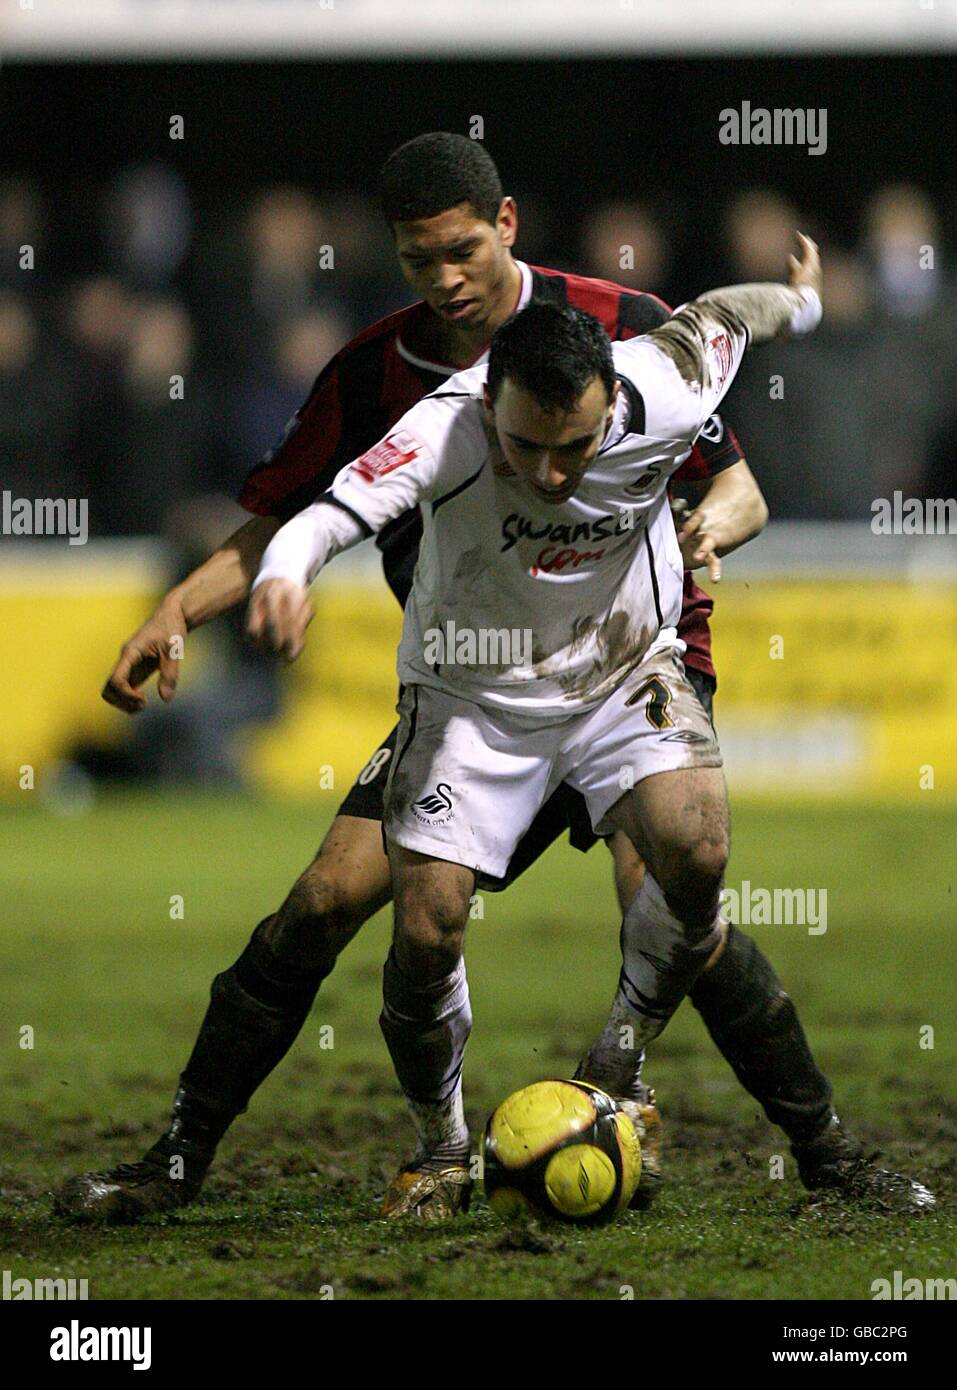 Soccer - FA Cup - Third Round Replay - Histon v Swansea City - The Glassworld Stadium. Swansea City's Leon Britton and Histon's Nathaniel Knight-Percival (back) battle for the ball Stock Photo